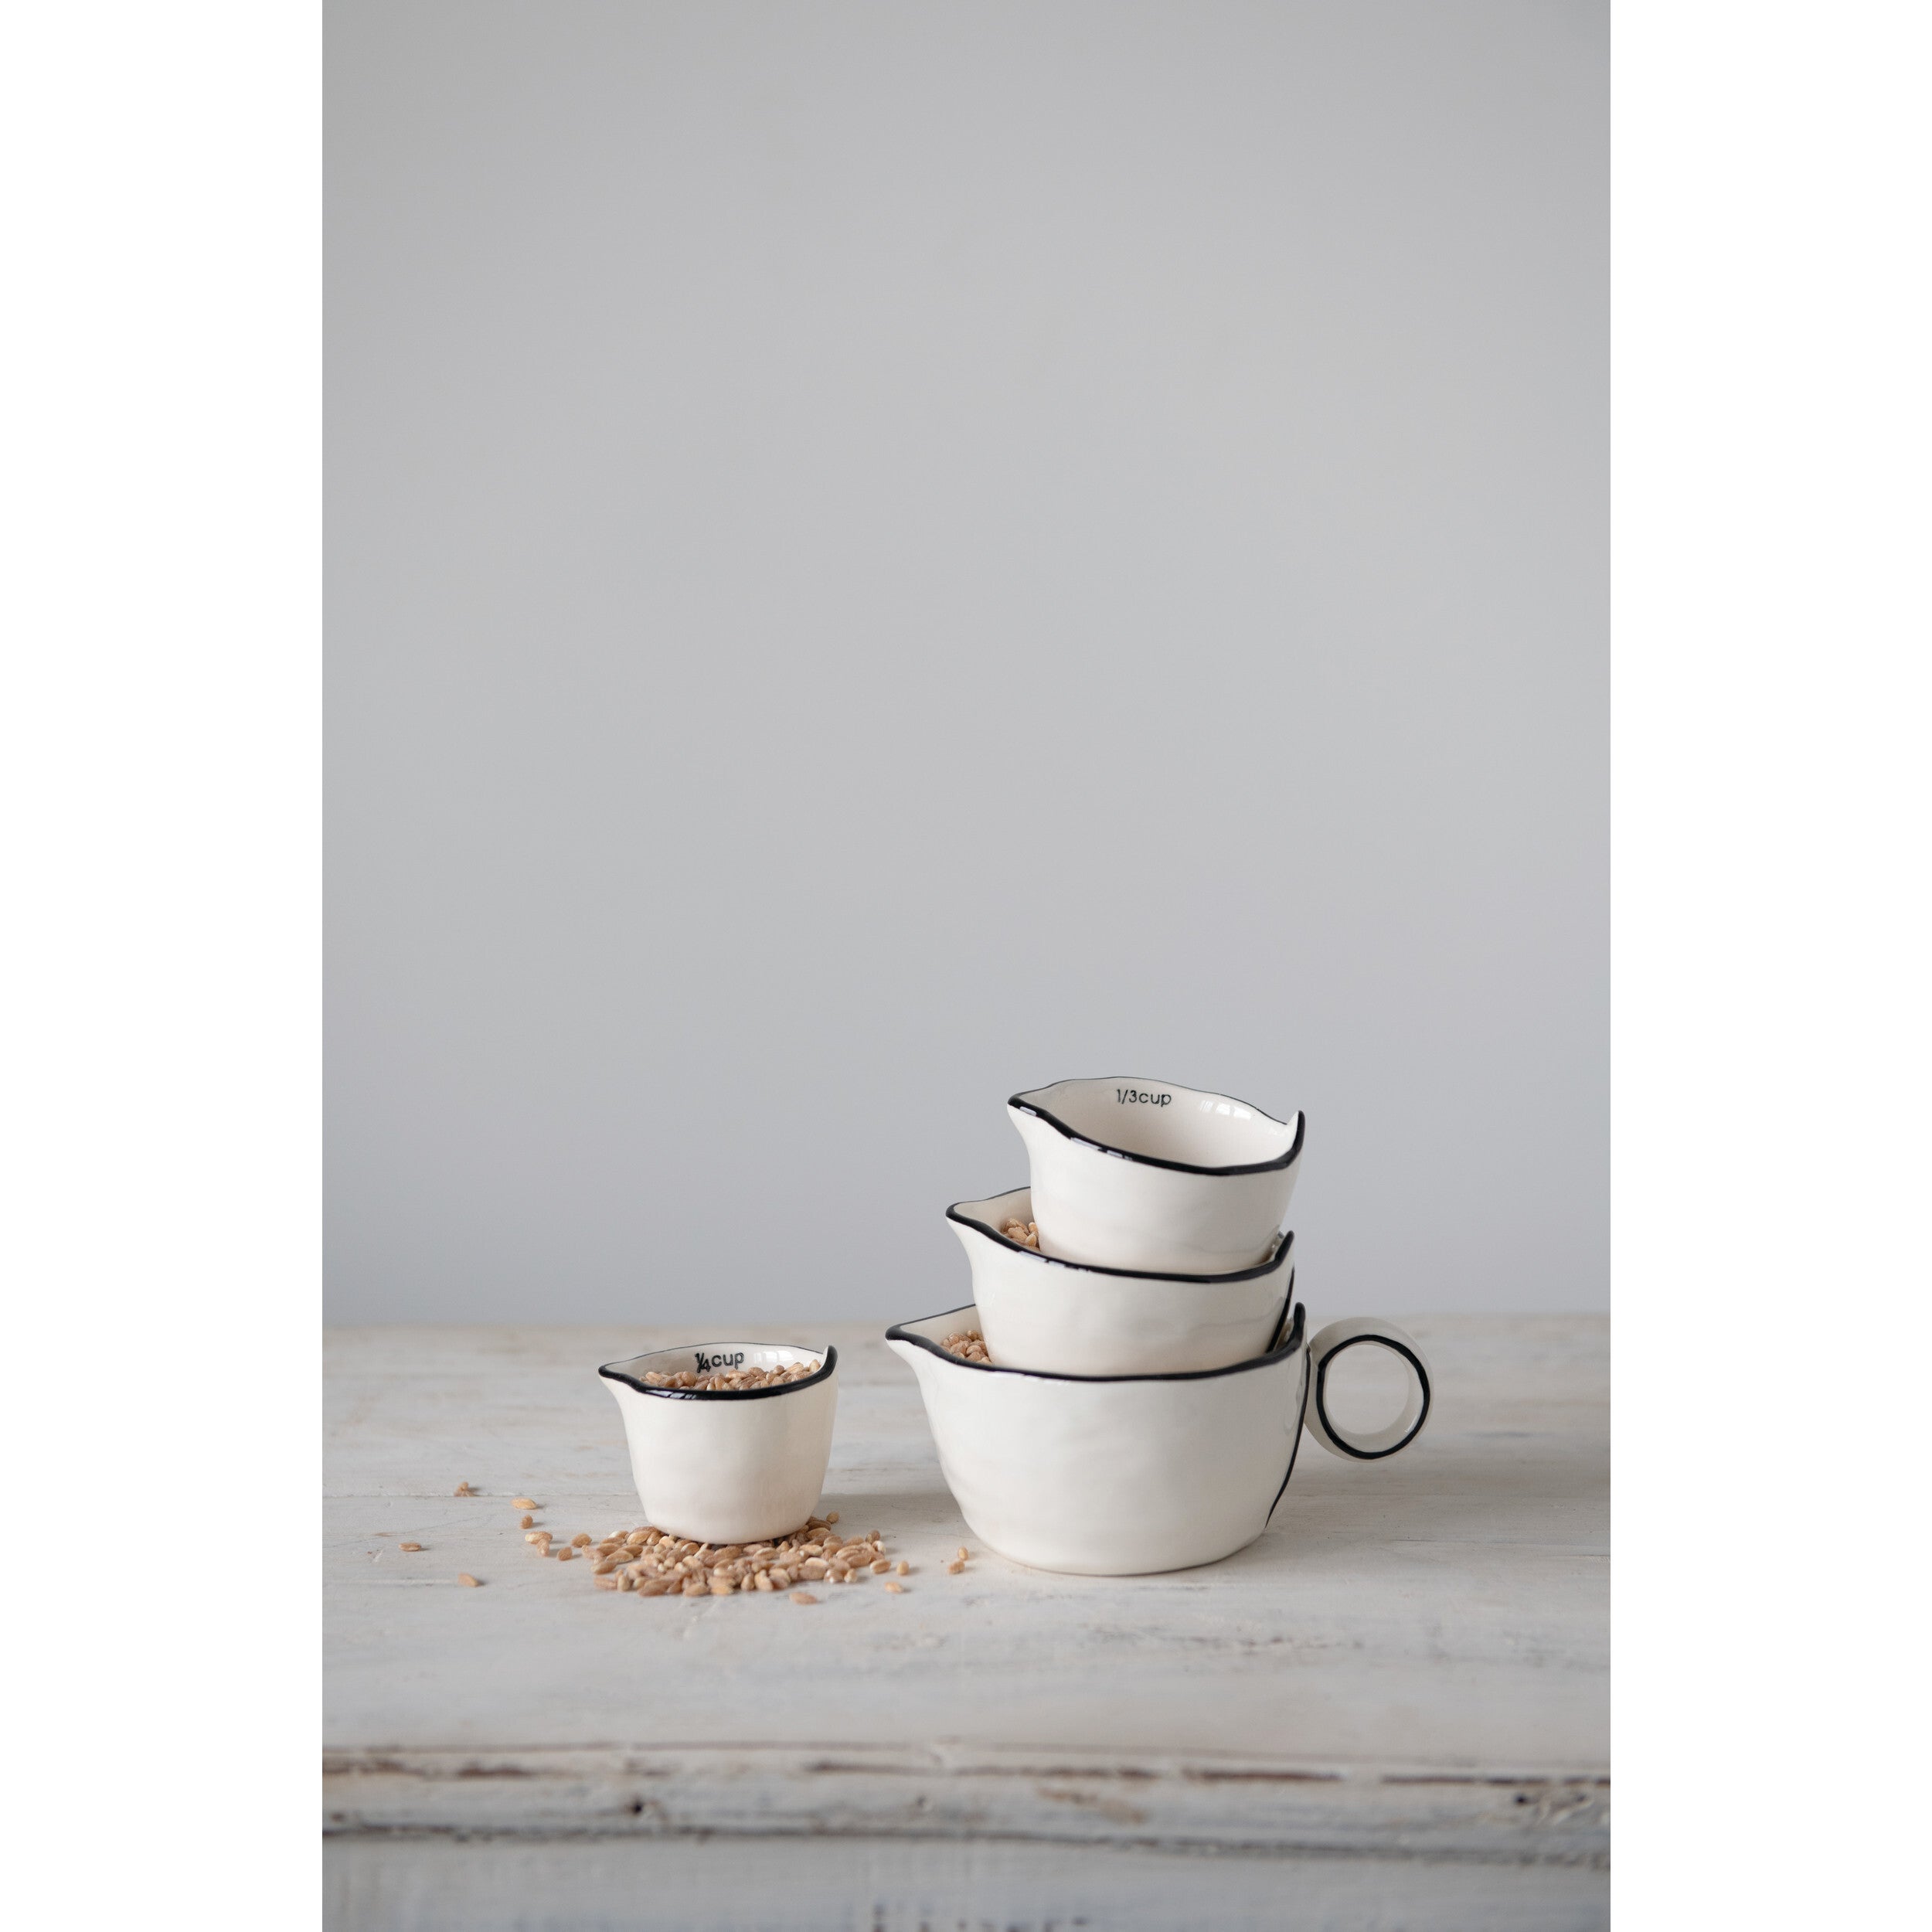 Murchison-Hume Ceramic Measuring Cup